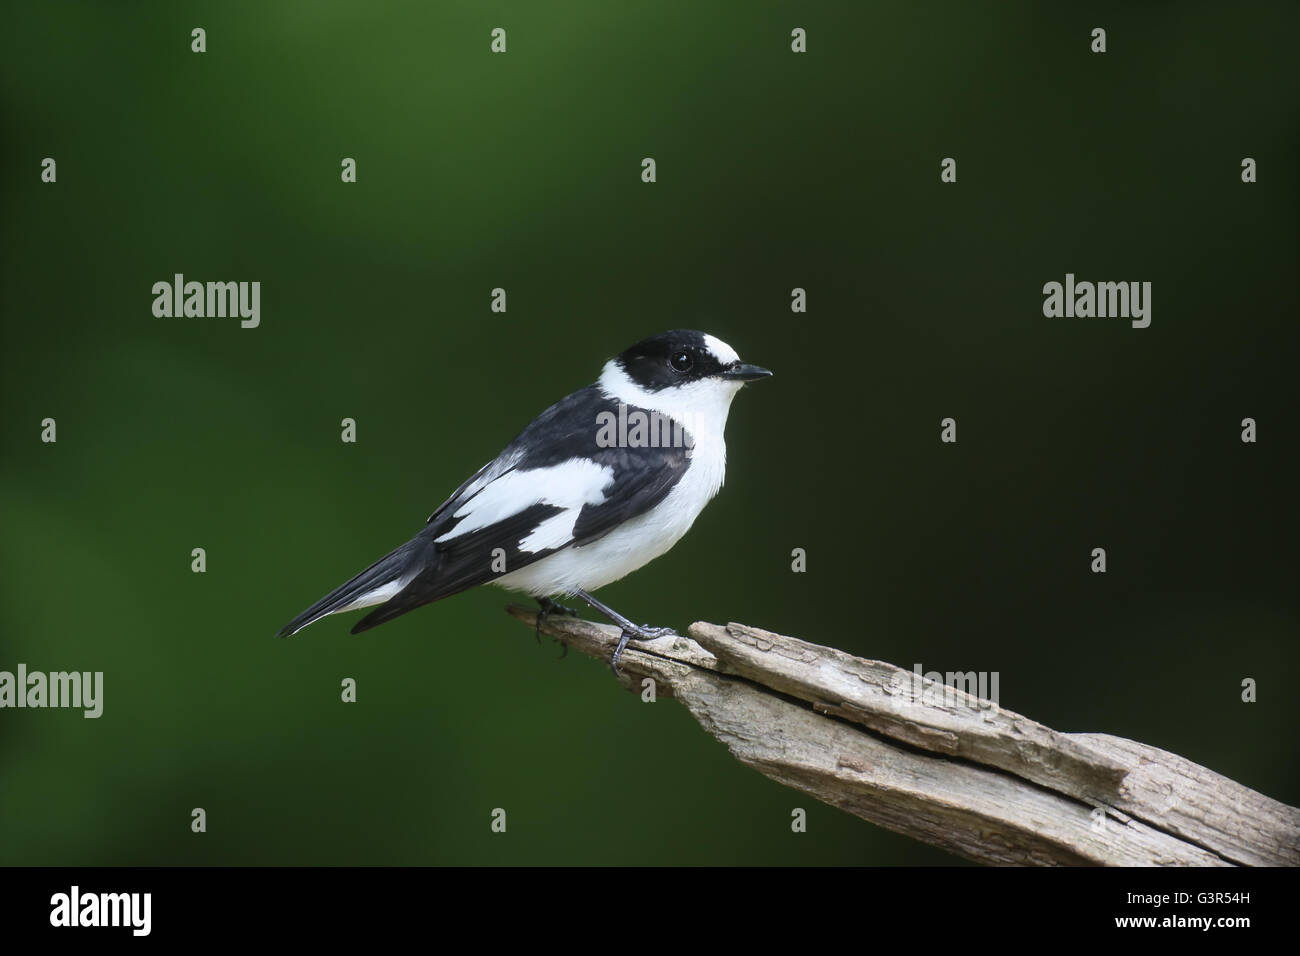 Collared flycatcher, Ficedula albicollis, single male on branch, Hungary, May 2016 Stock Photo